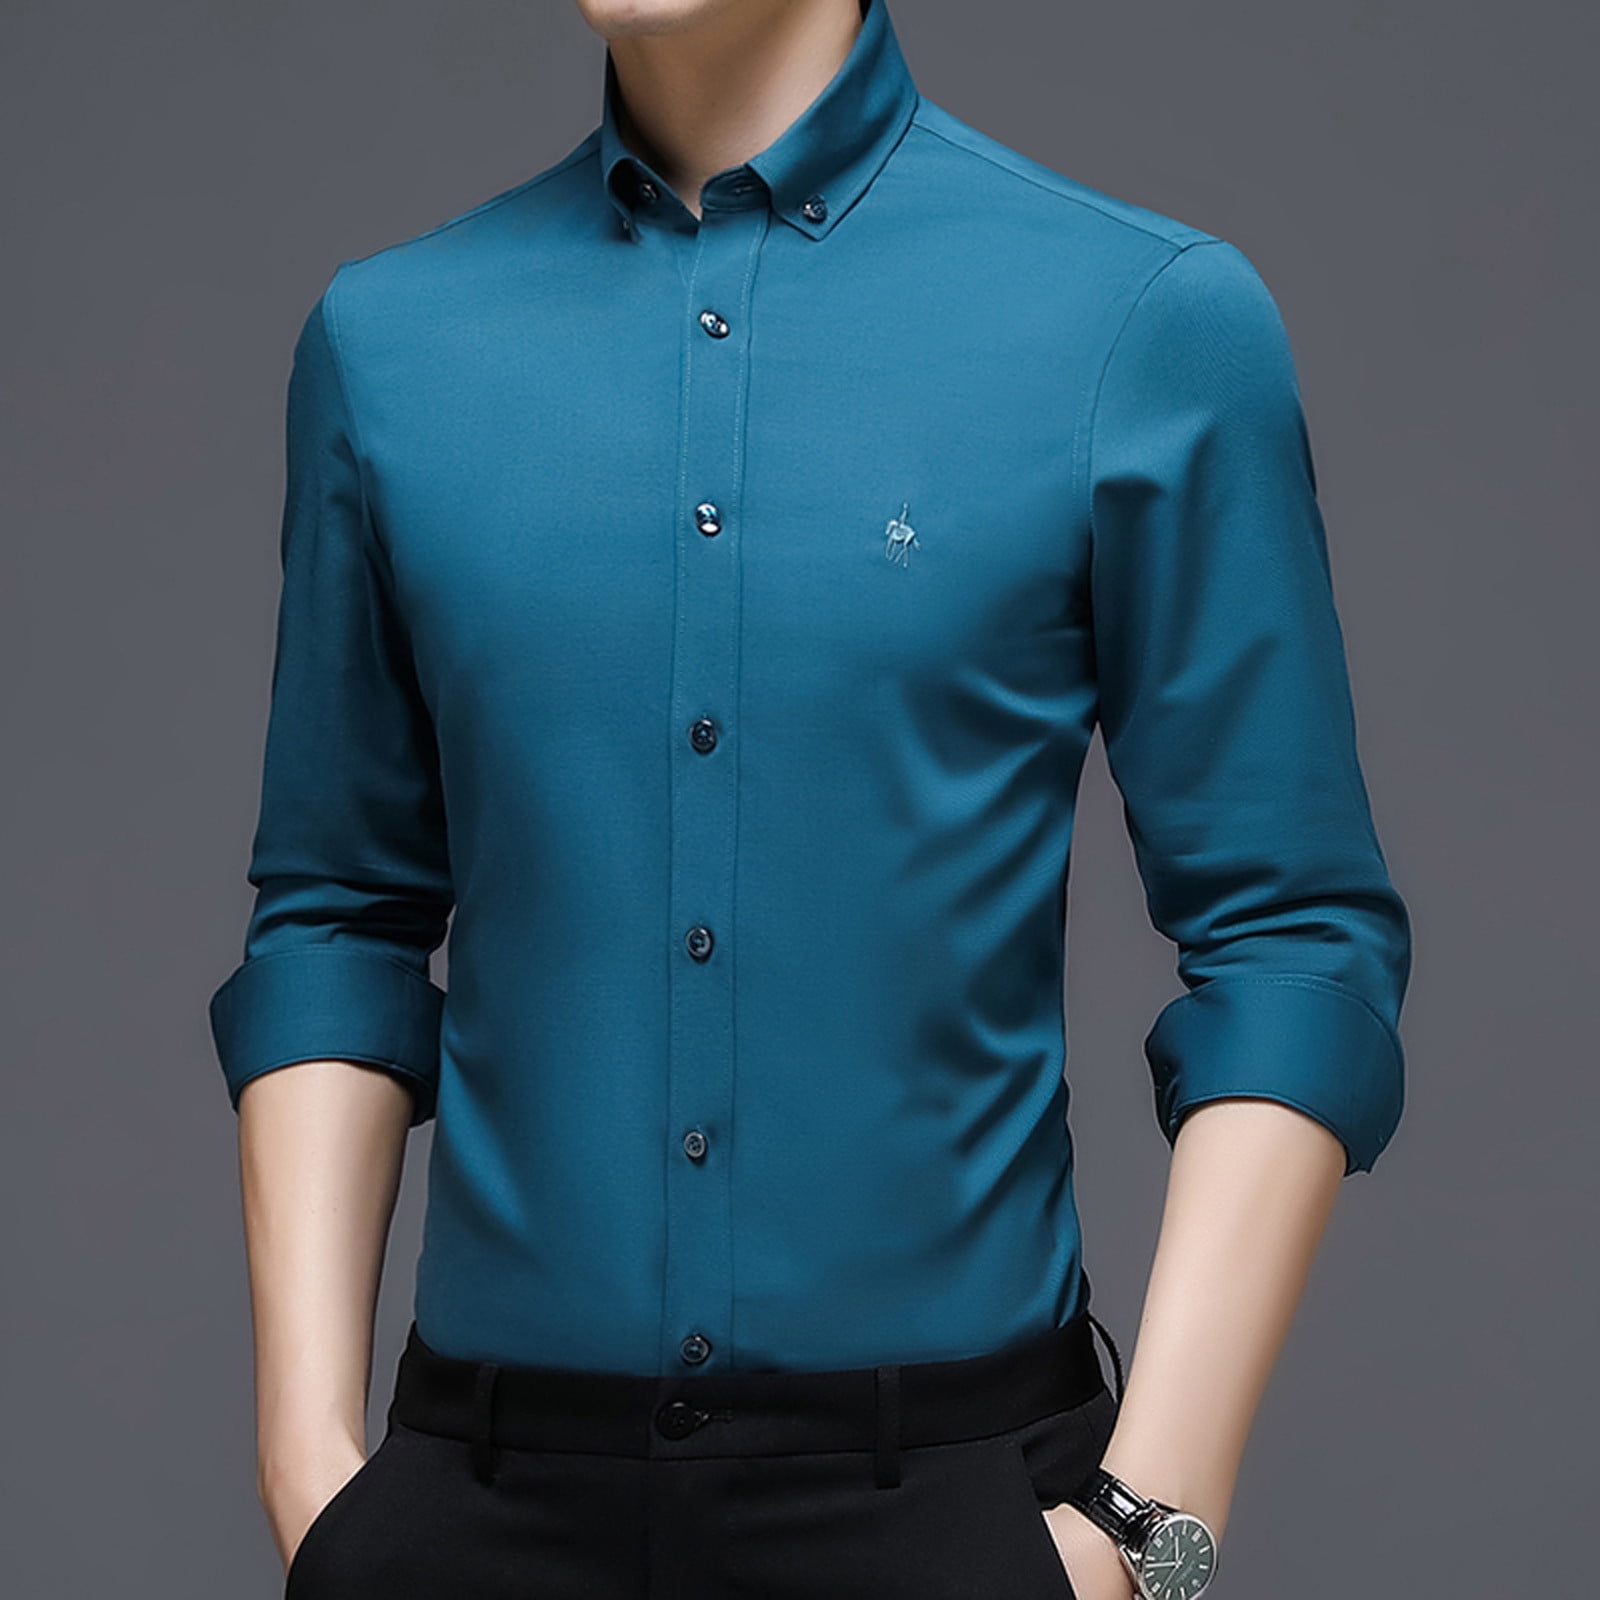 2023 Clearance Men's Big and Tall Dress Shirts,Slim Fit Button Down ...